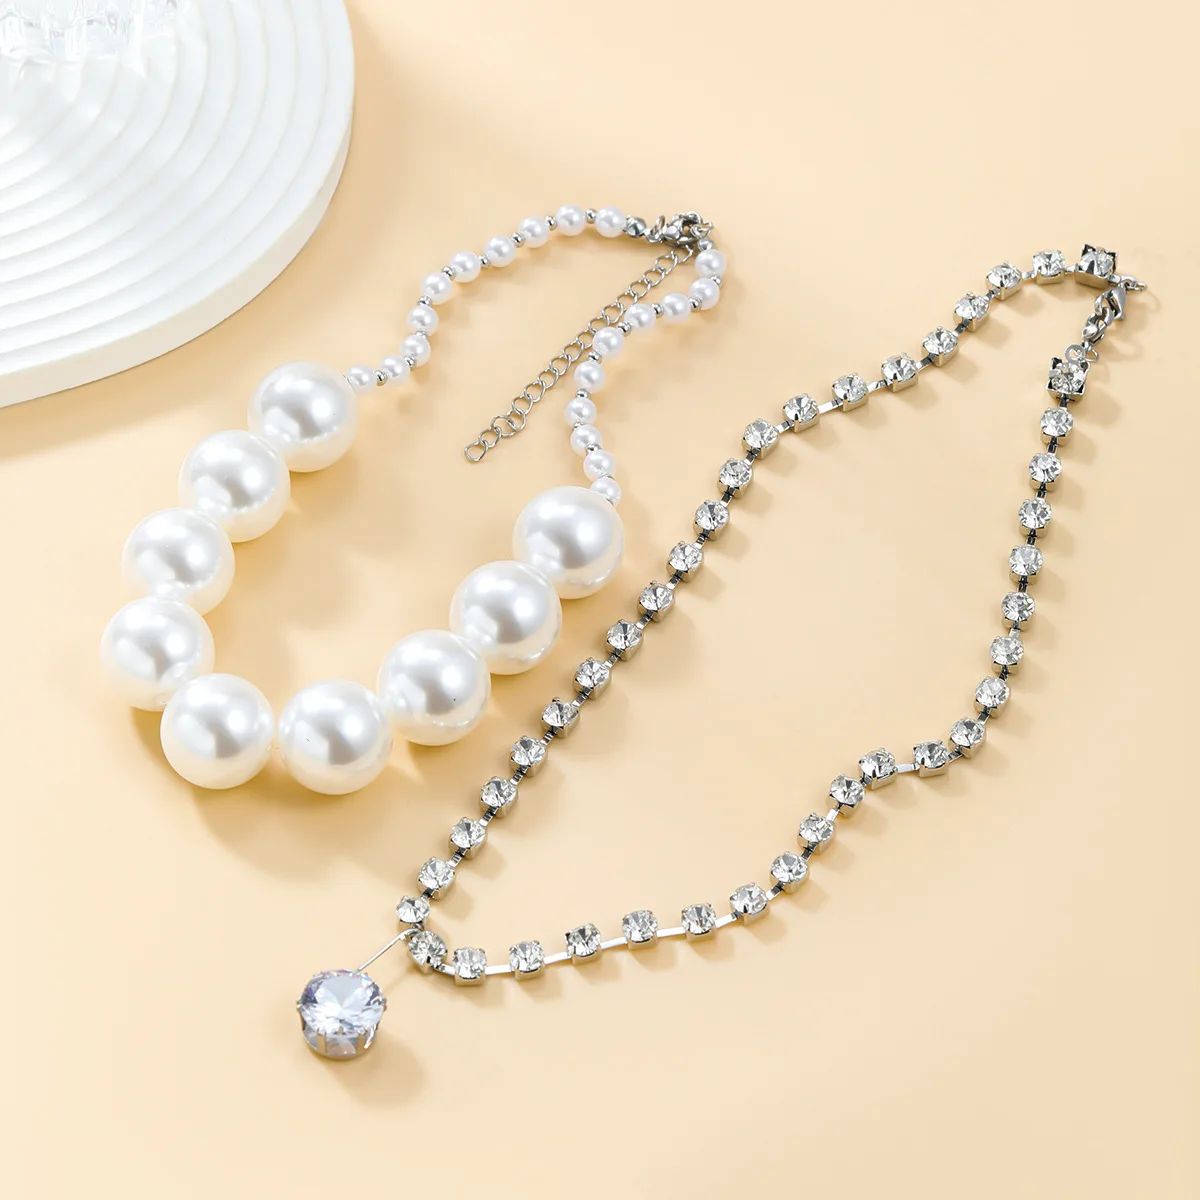 

2PC/SET Imitation White Pearl Bead Chain Necklace for Women Fashion Statement Crystals Pearls Collar Jewelry